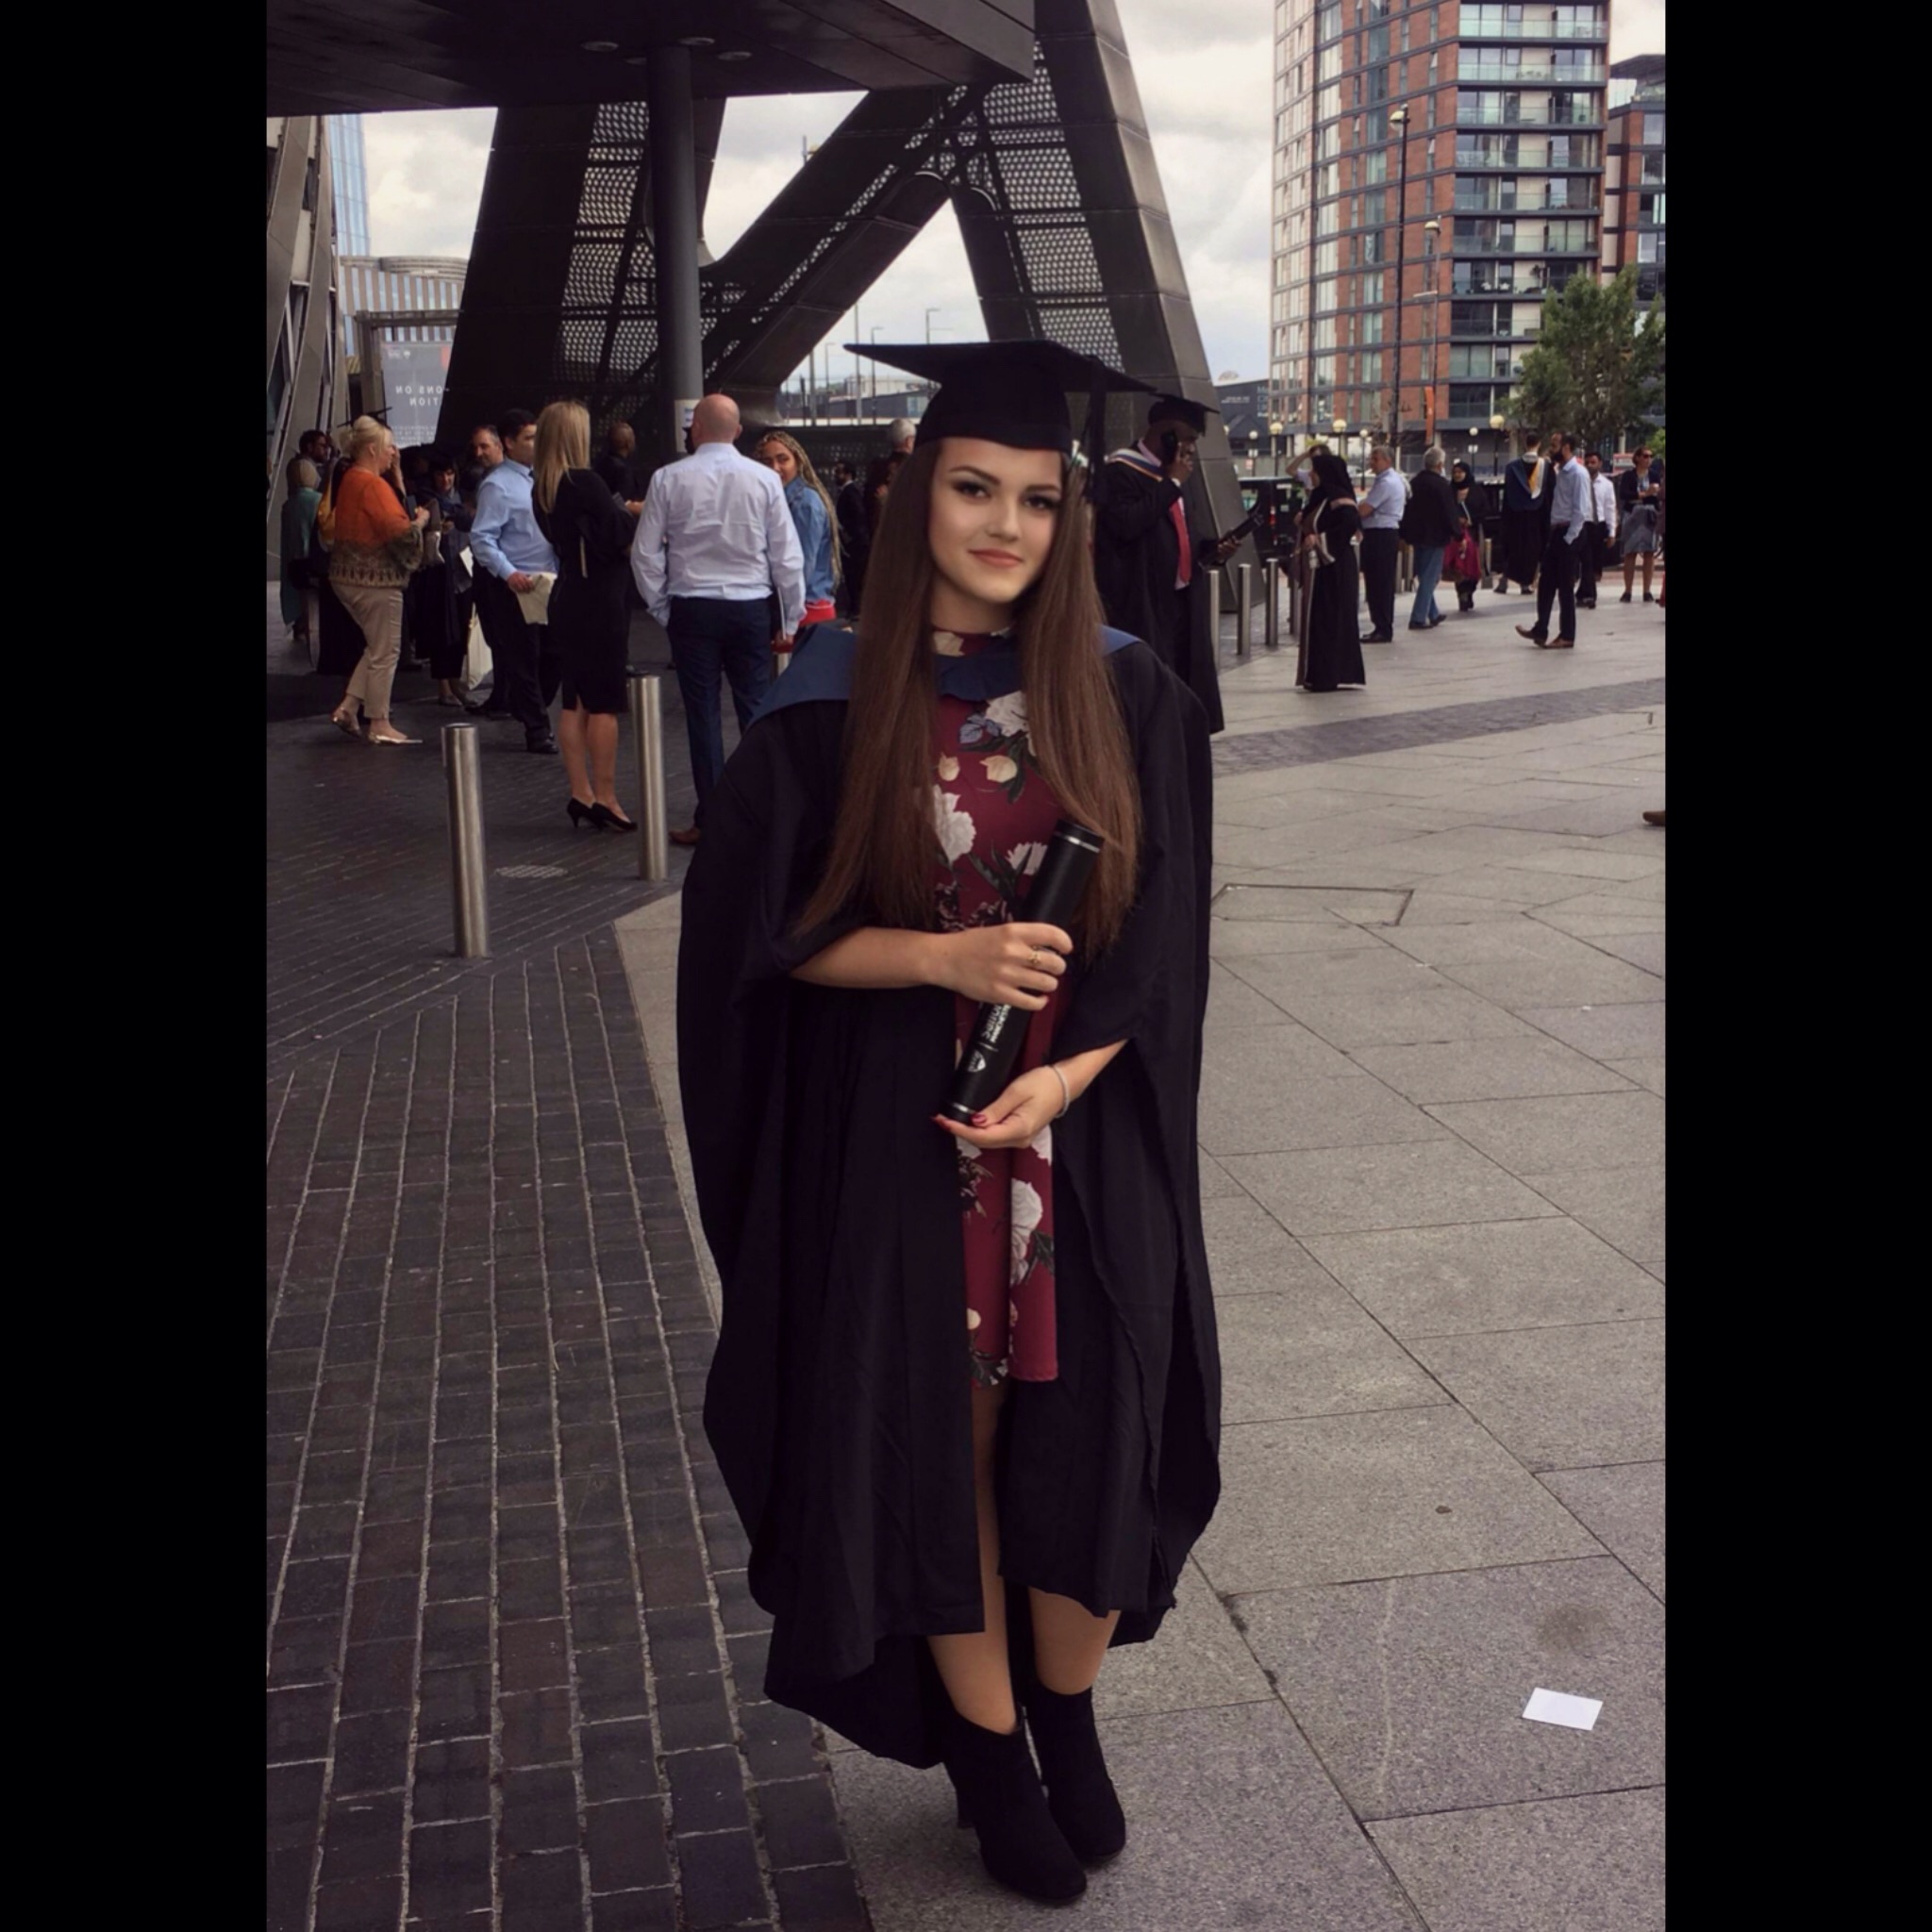 A photograph of Maria Efimova in a graduation gown outside the Lowry Theatre